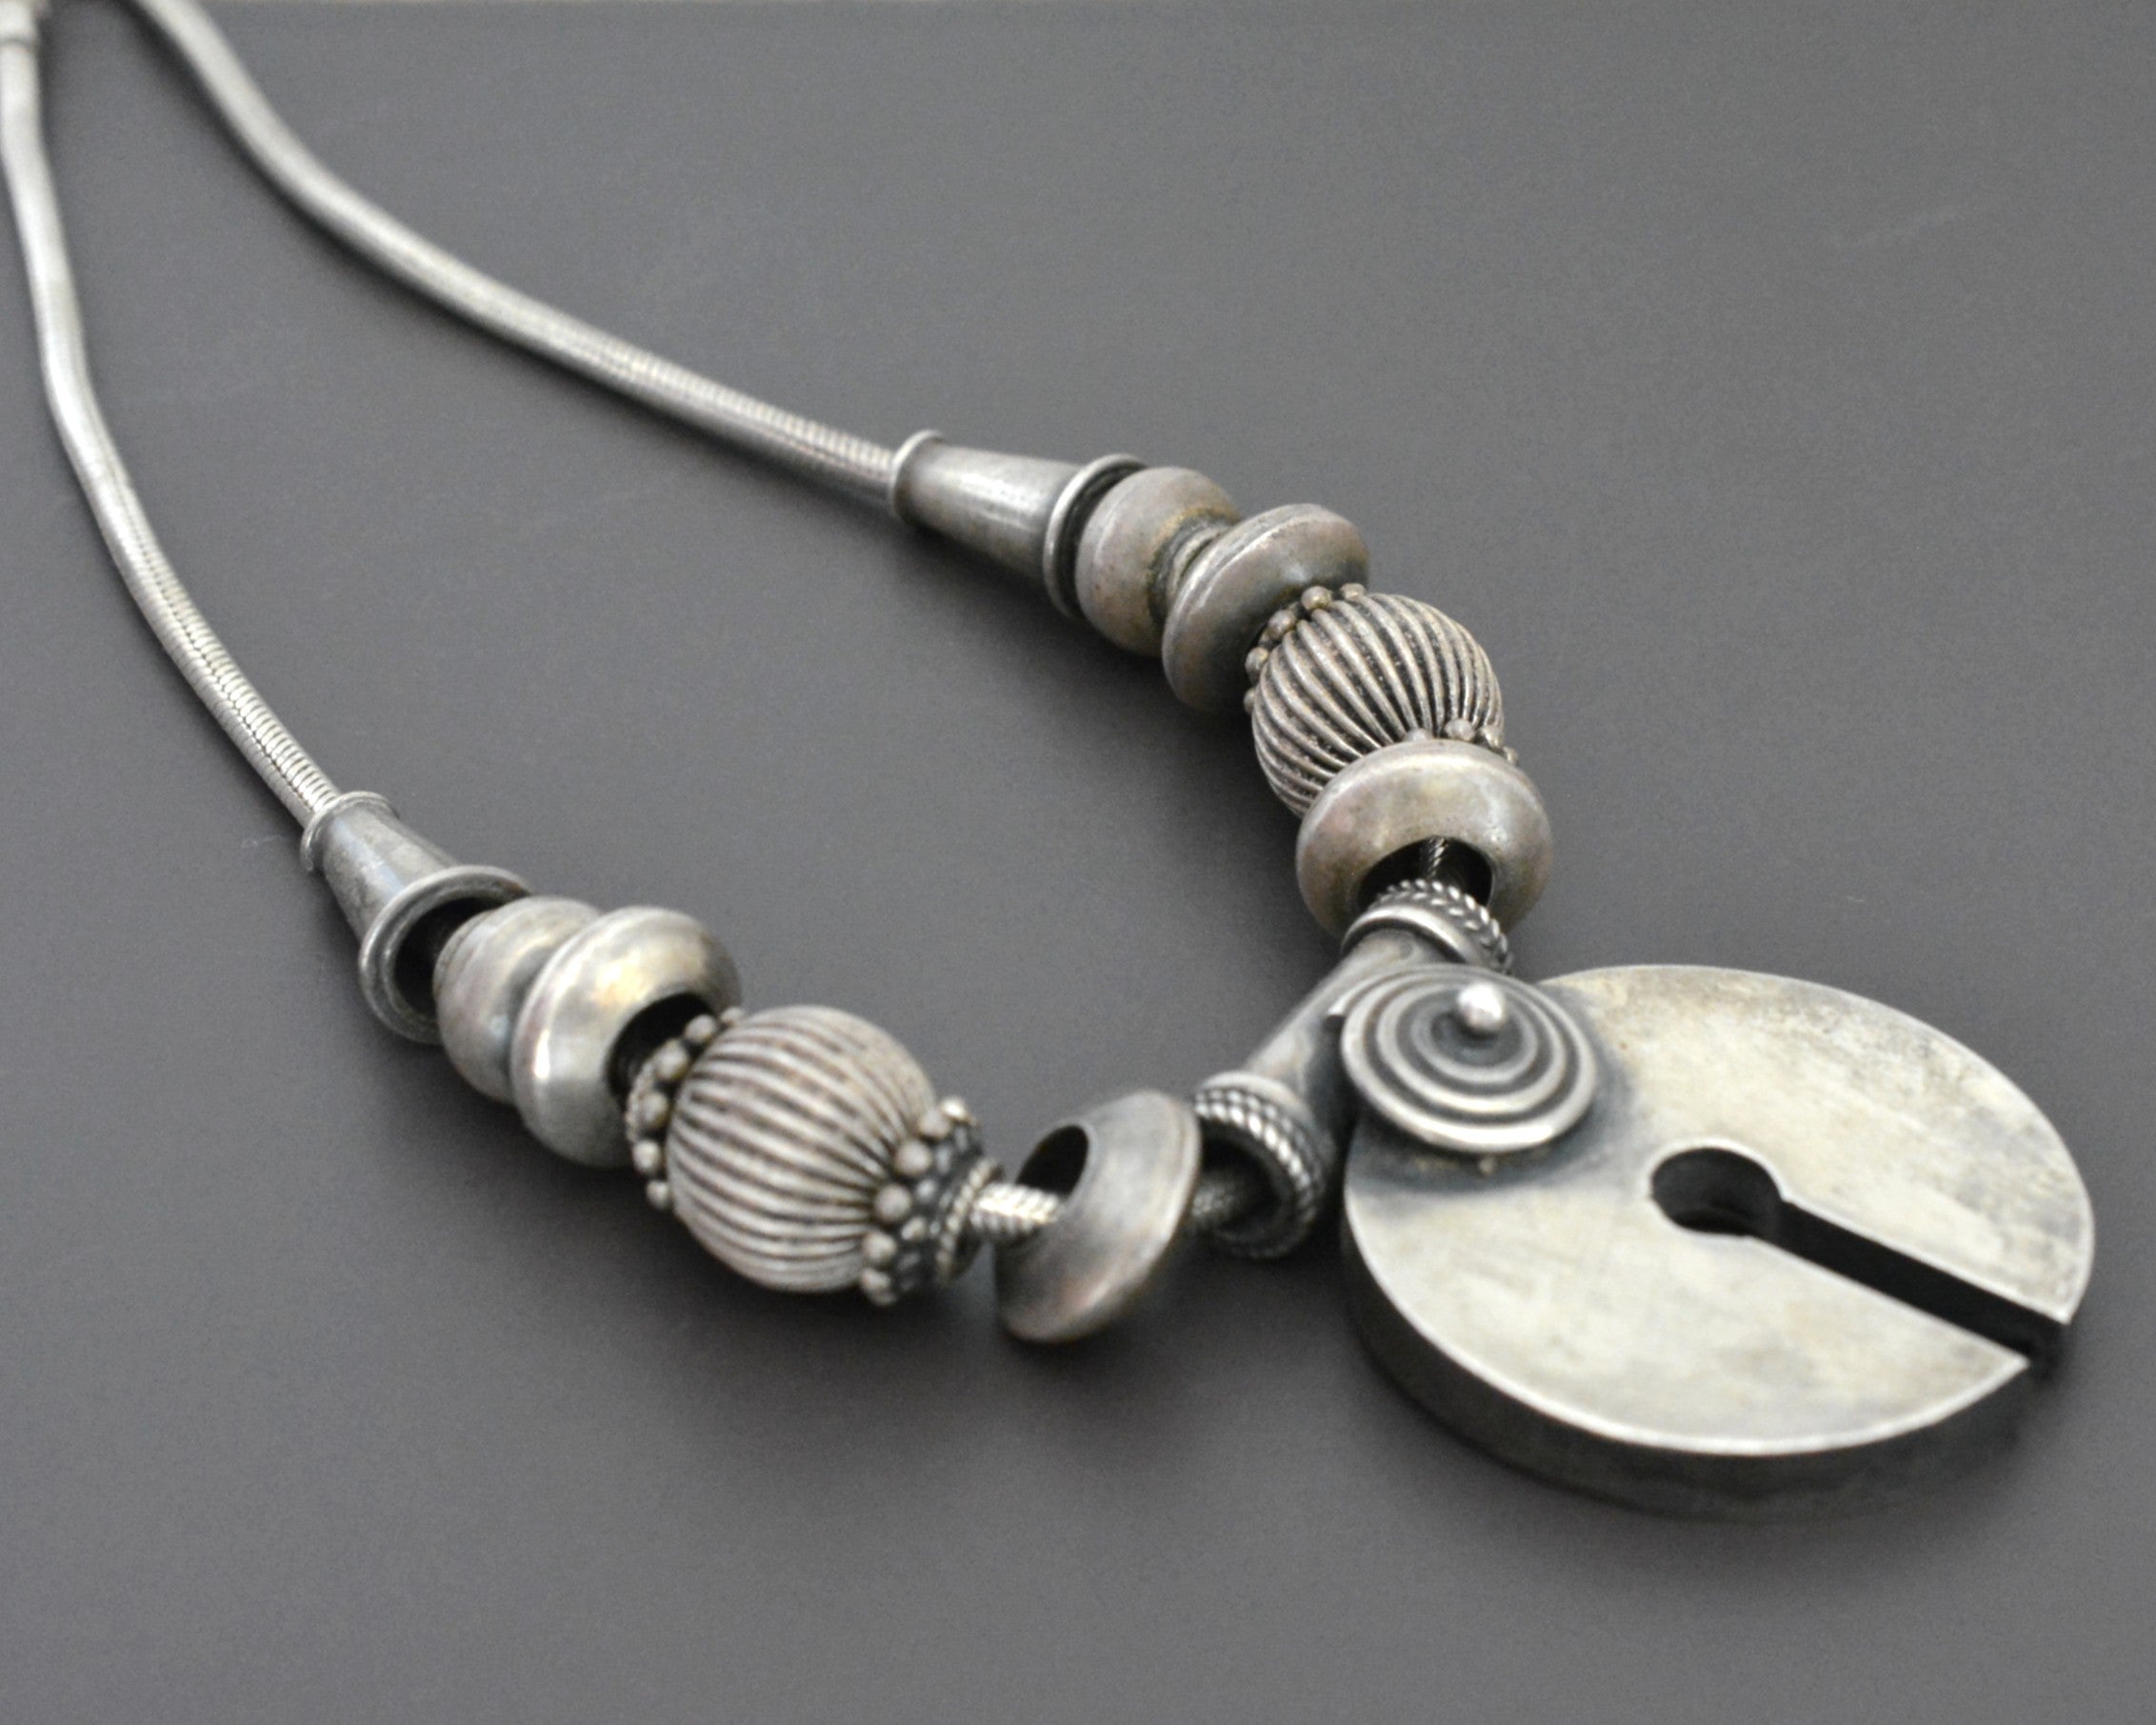 Indian Amulet Silver Beads Necklace with Snake Chain